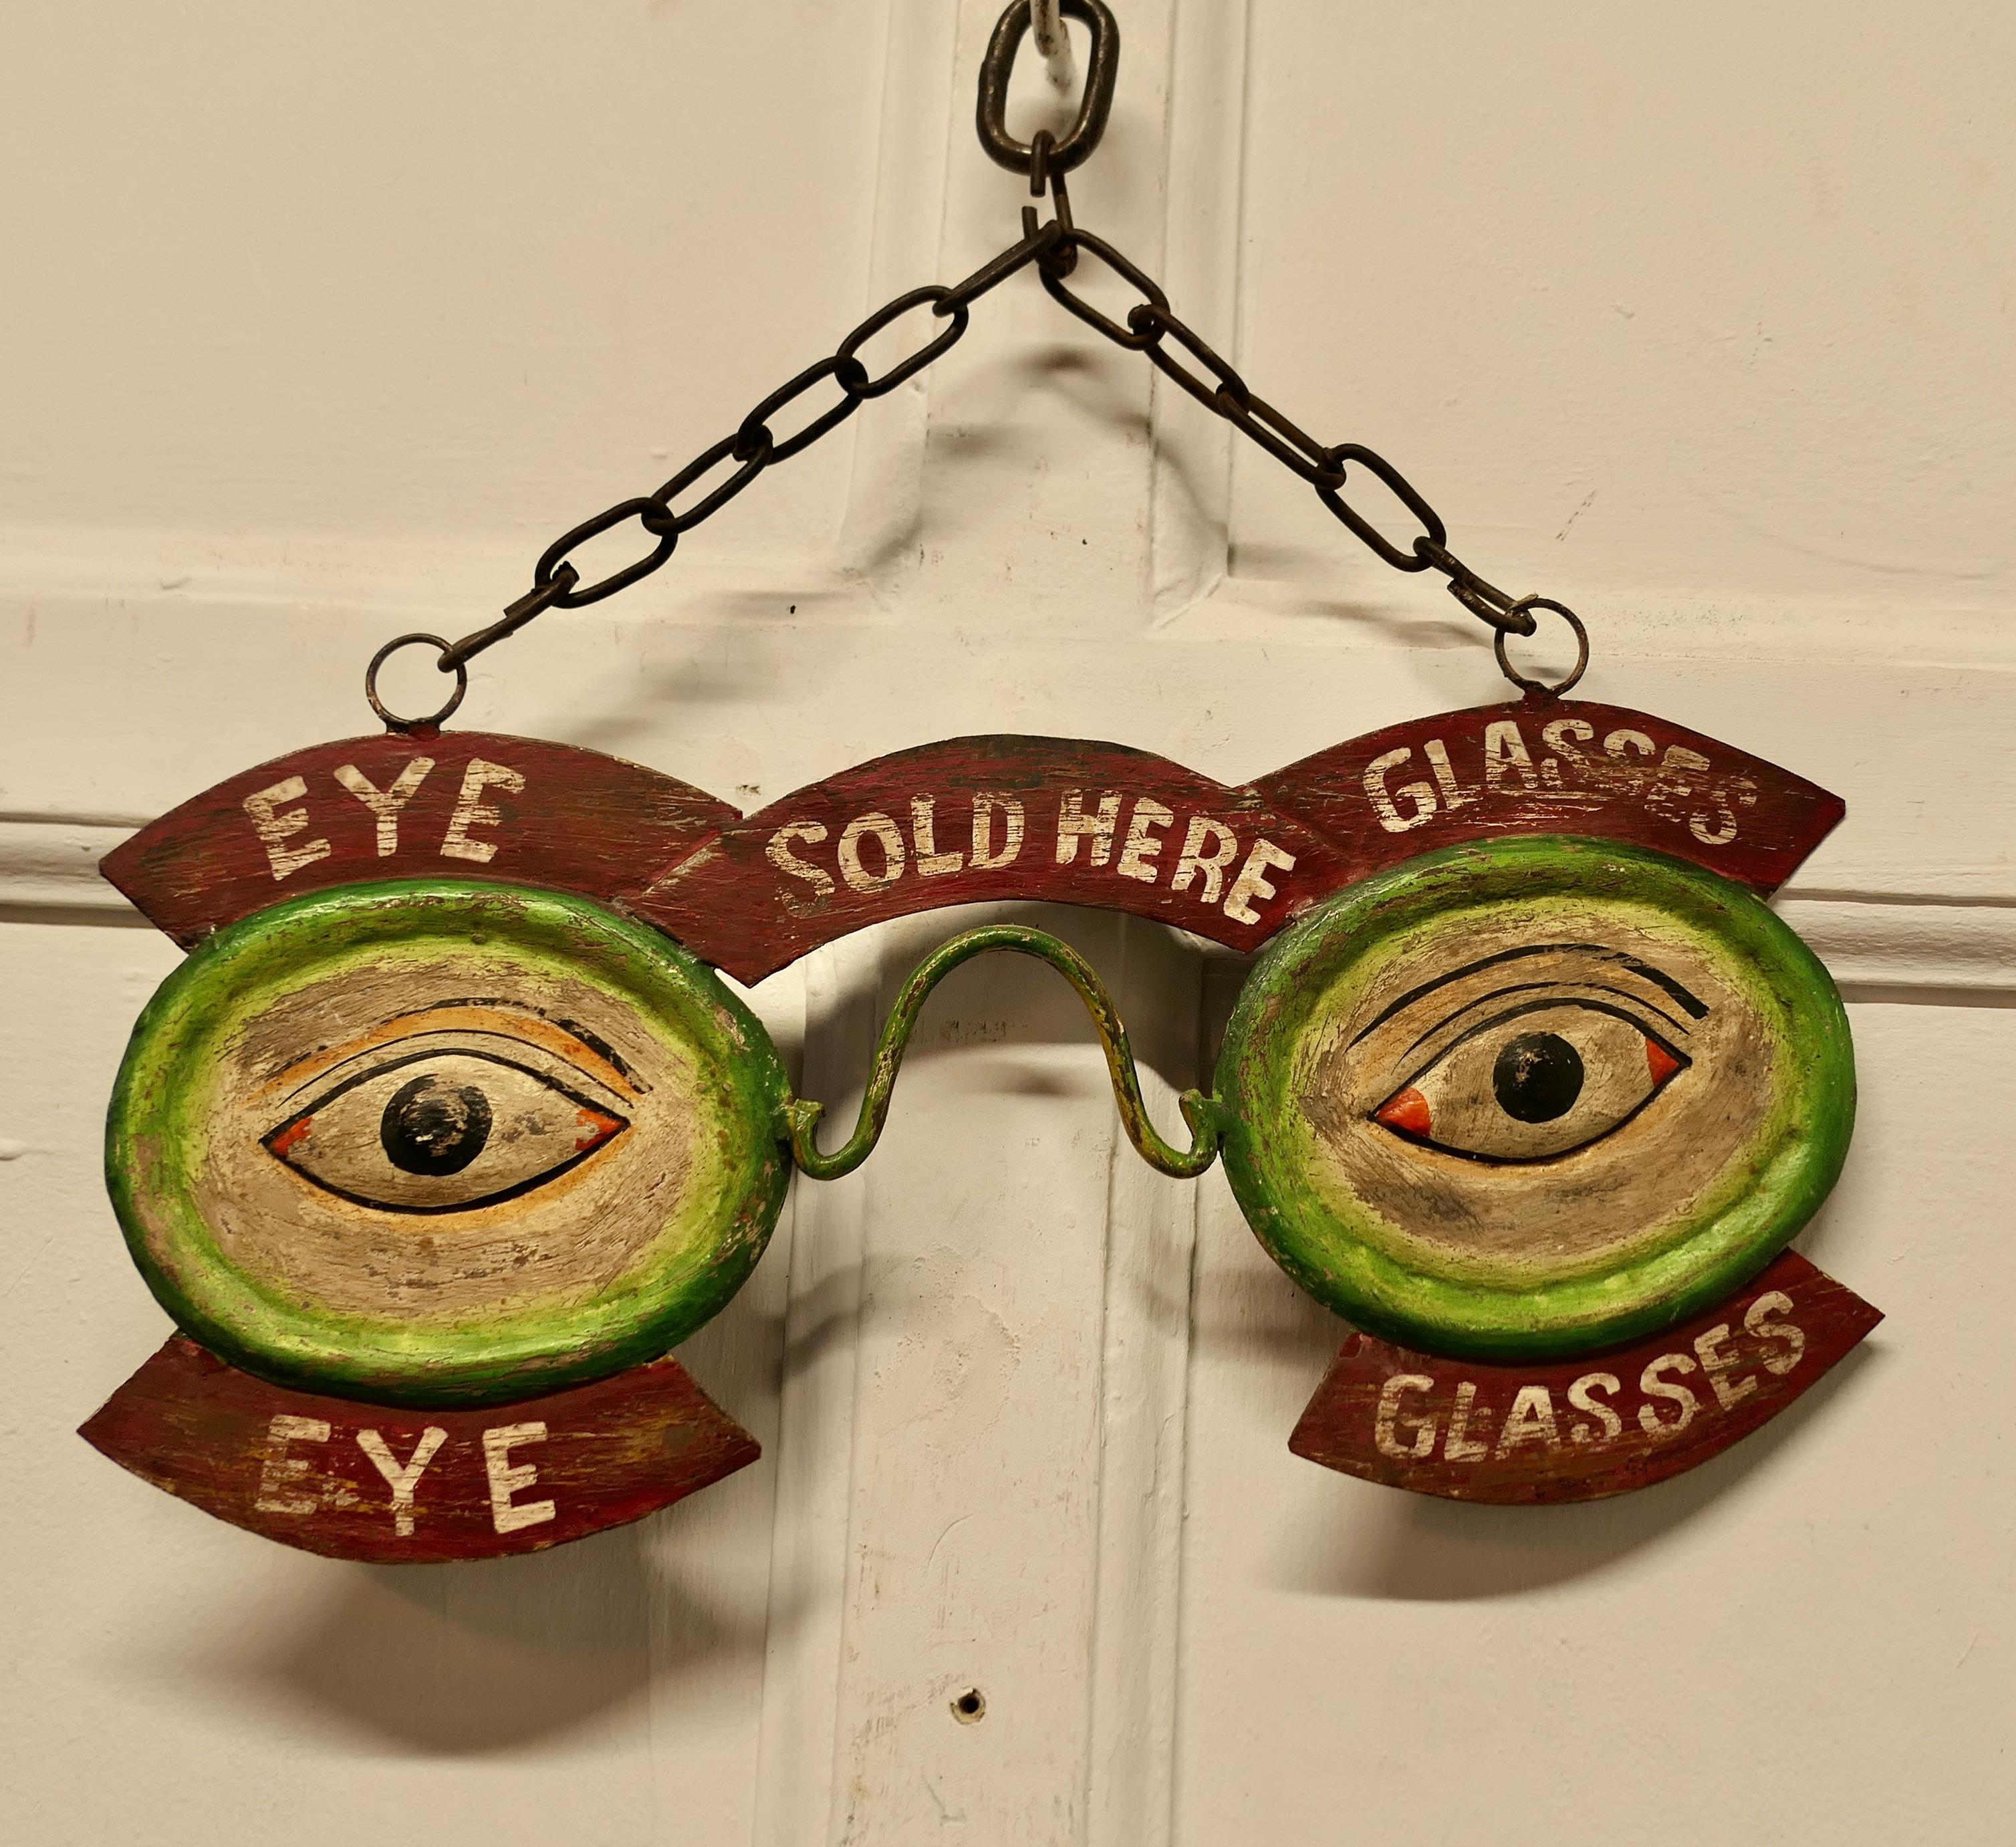 Eye and Glasses Window Display Trade Sign

The sign is made in presses tin, it seems to be hand painted with the slogan Eye Glasses Sold Here
The sign is a wall hanging piece suspended on a chain, it is 13” top to bottom and 14” across
TSC178